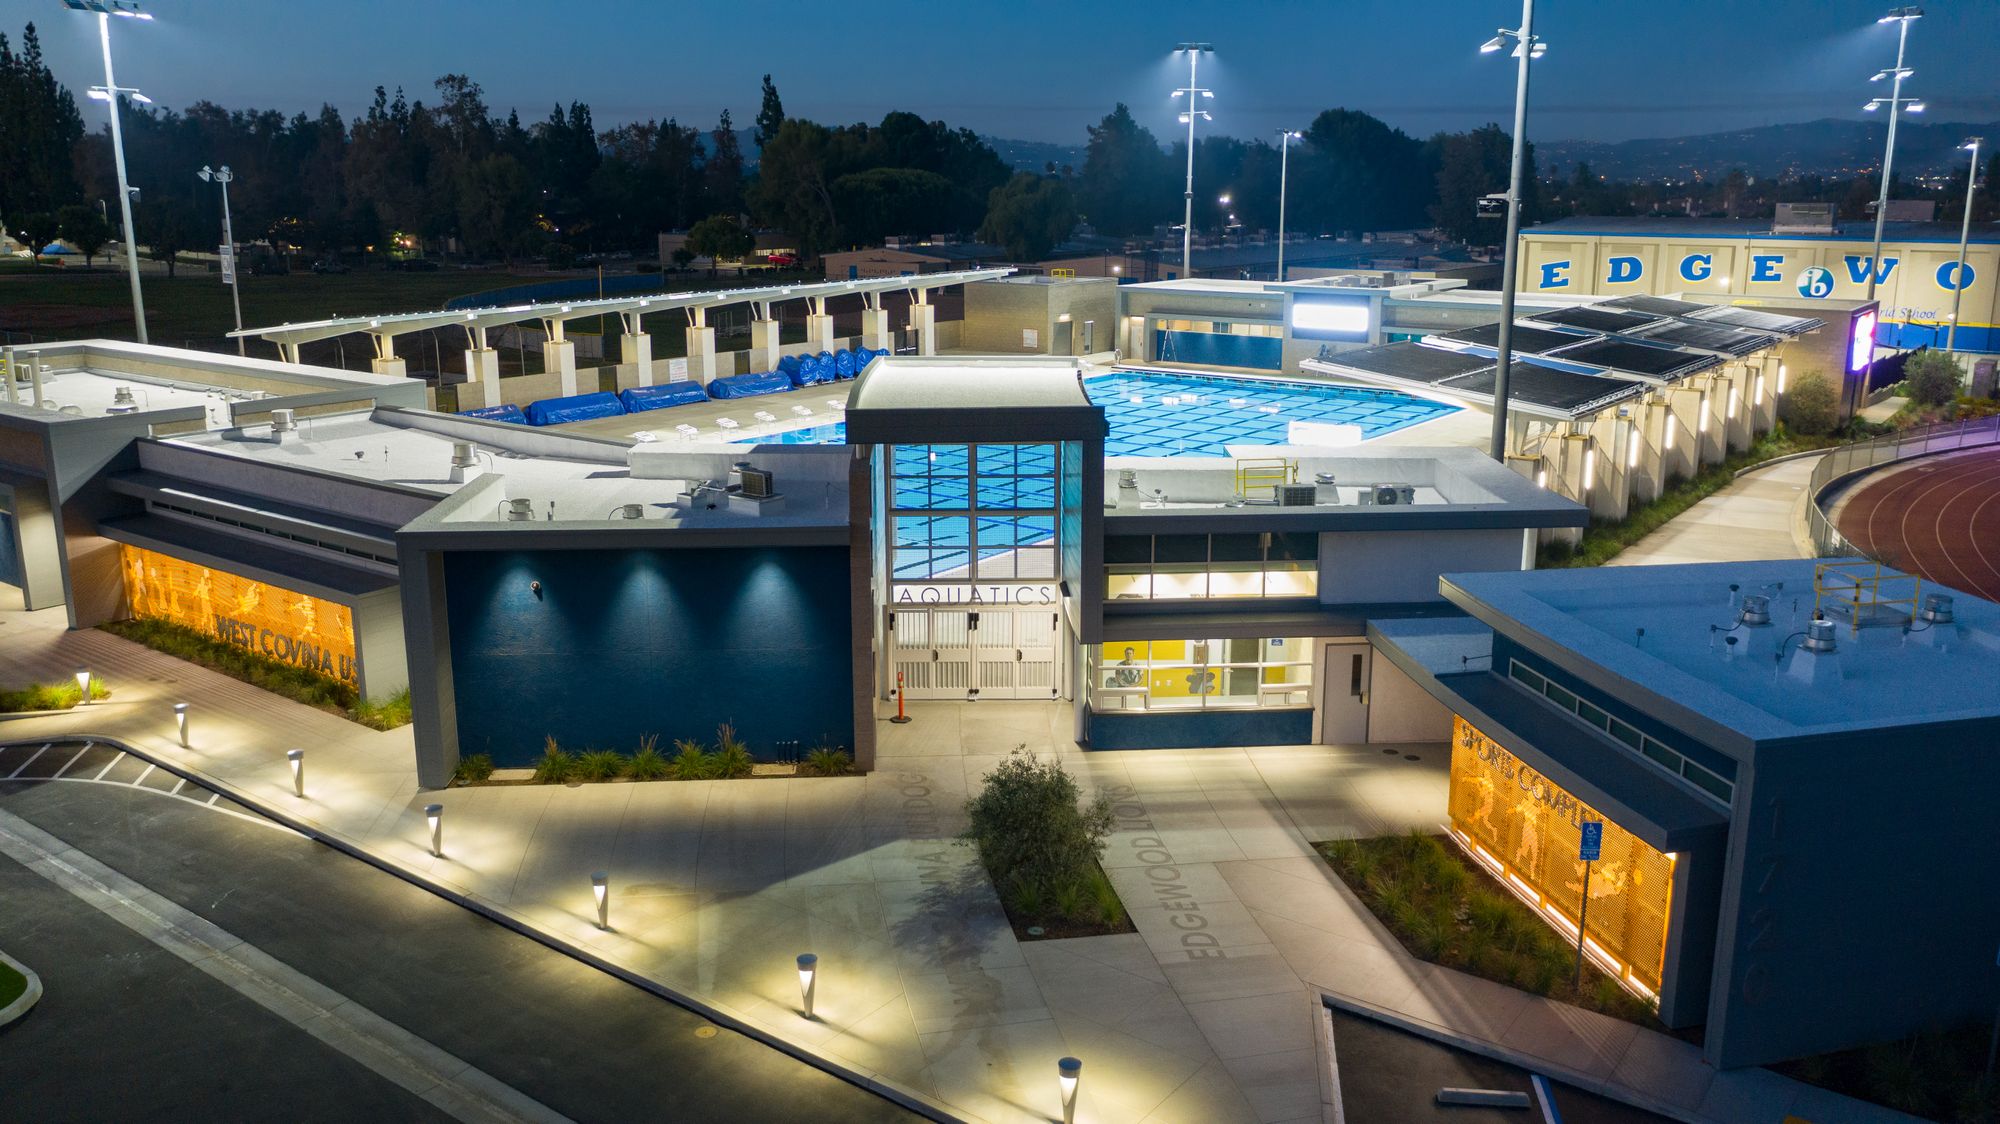 An image of Edgewood High School Aquatics Sports Complex from above.